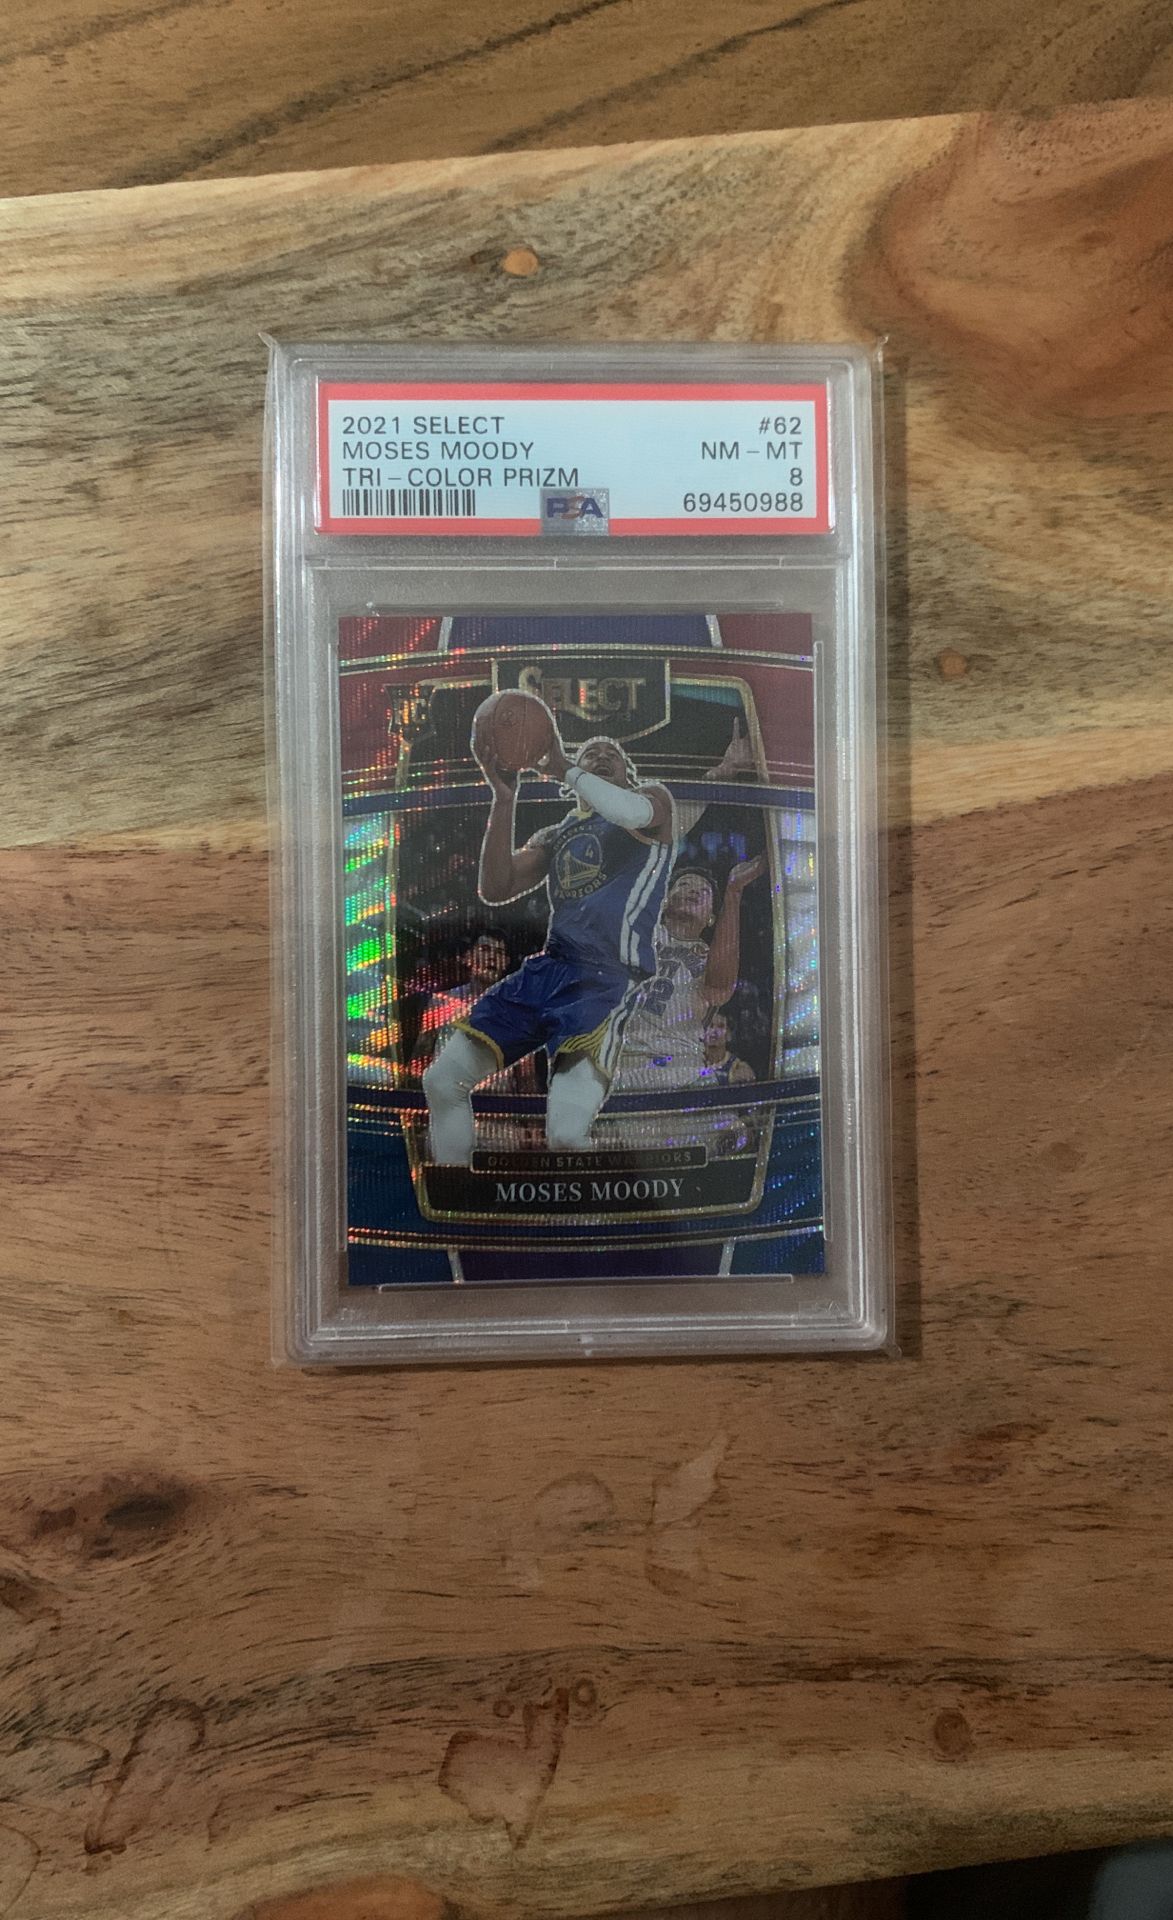 2021 Select Moses Moody Tri-color Prizm Card